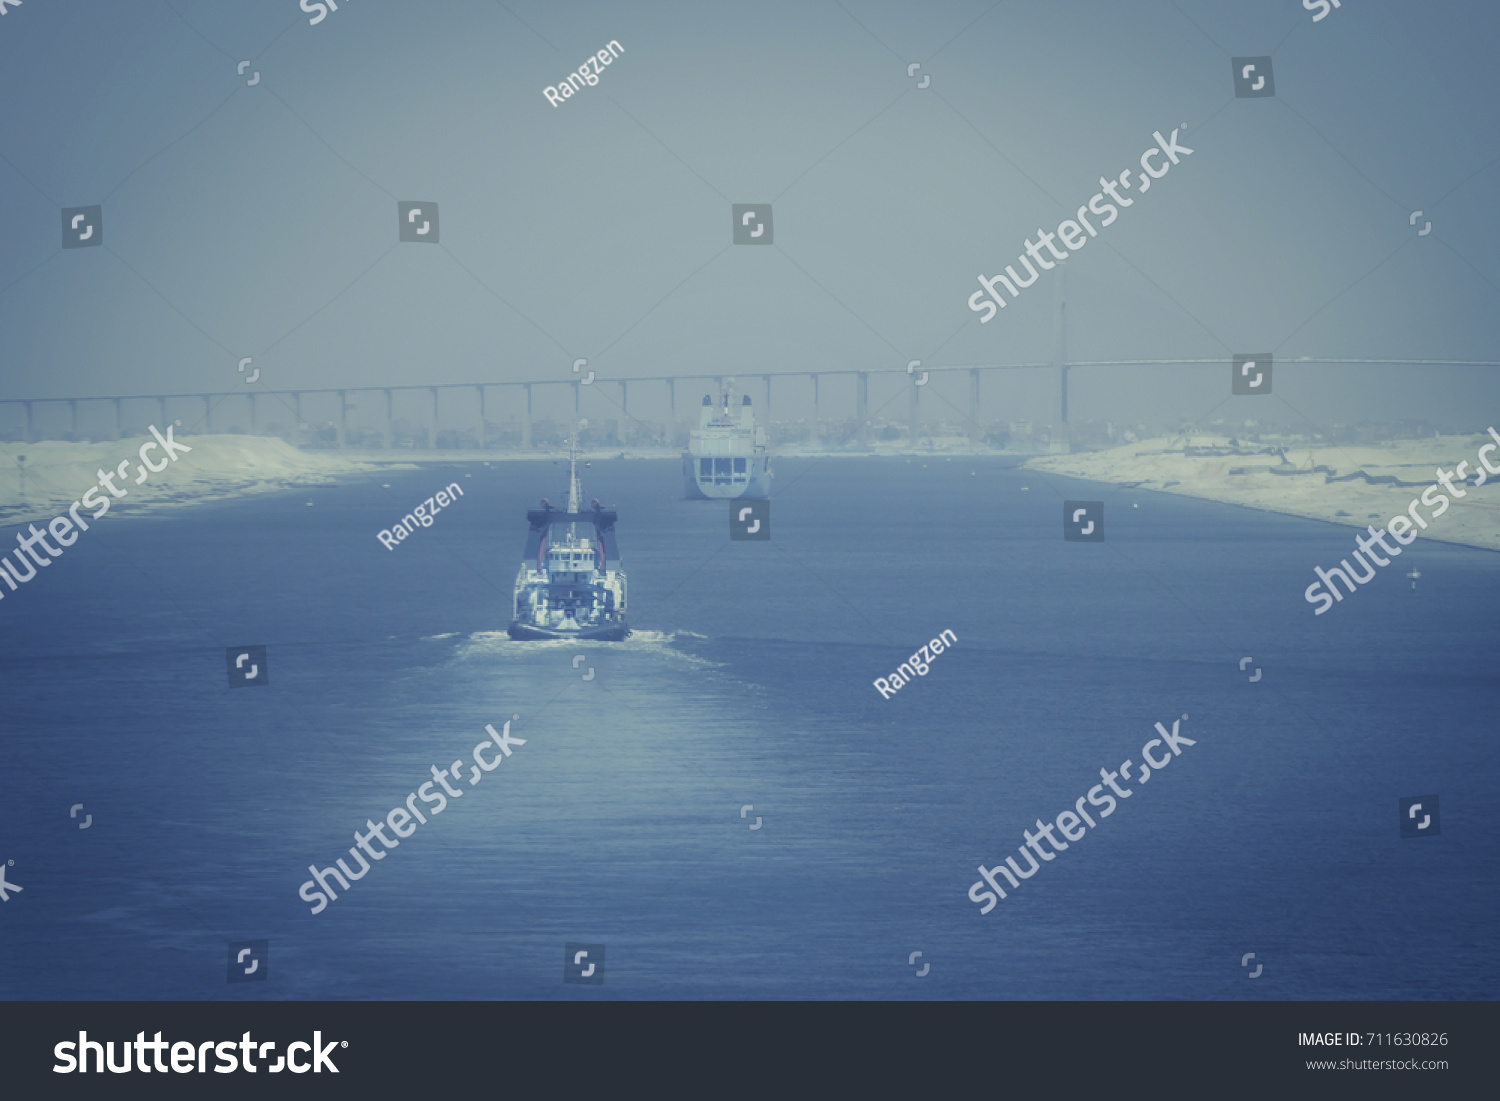 In the Suez Canal - a military ship and a tugboat forward to the city of  El Qantara and the Mubarak Peace Bridge in foggy evening mood #711630826